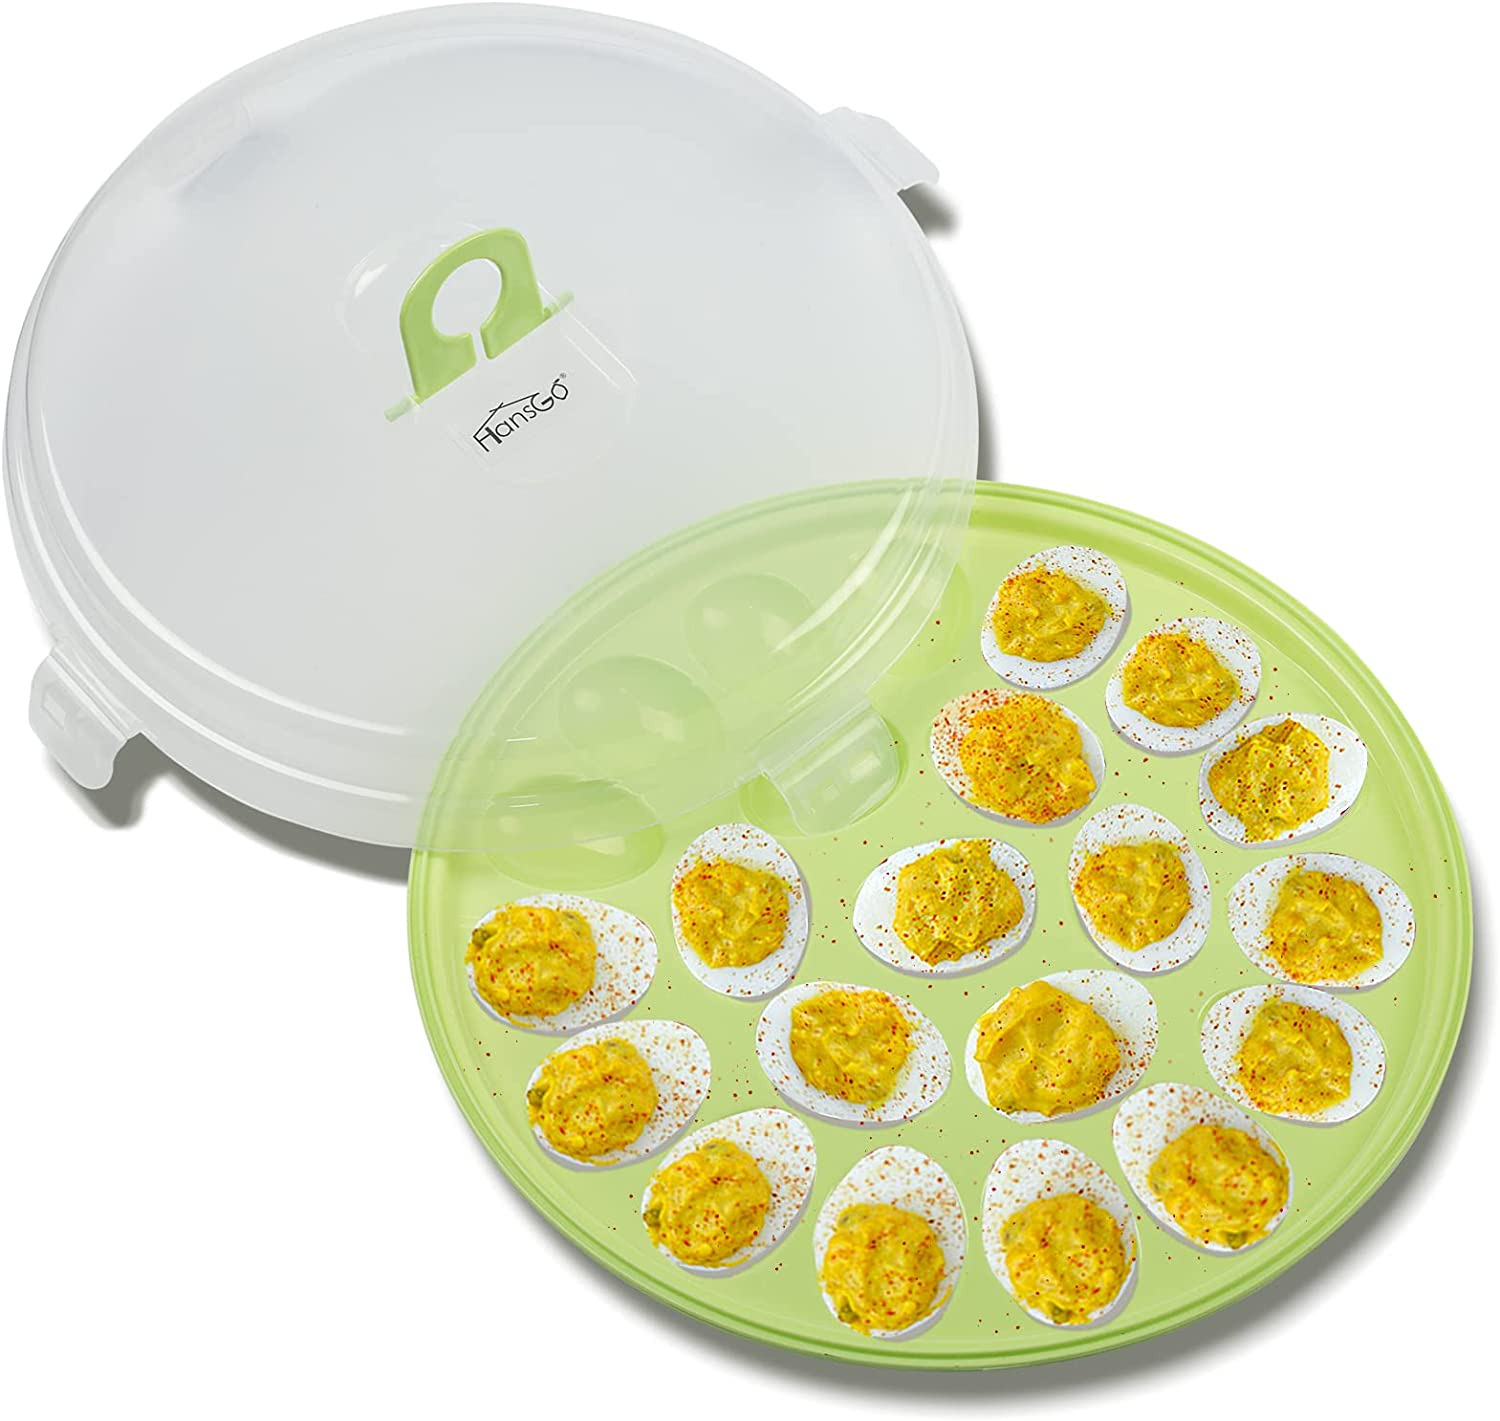 Round Deviled Egg Platter and Carrier with Lid - 22 Egg Slots 